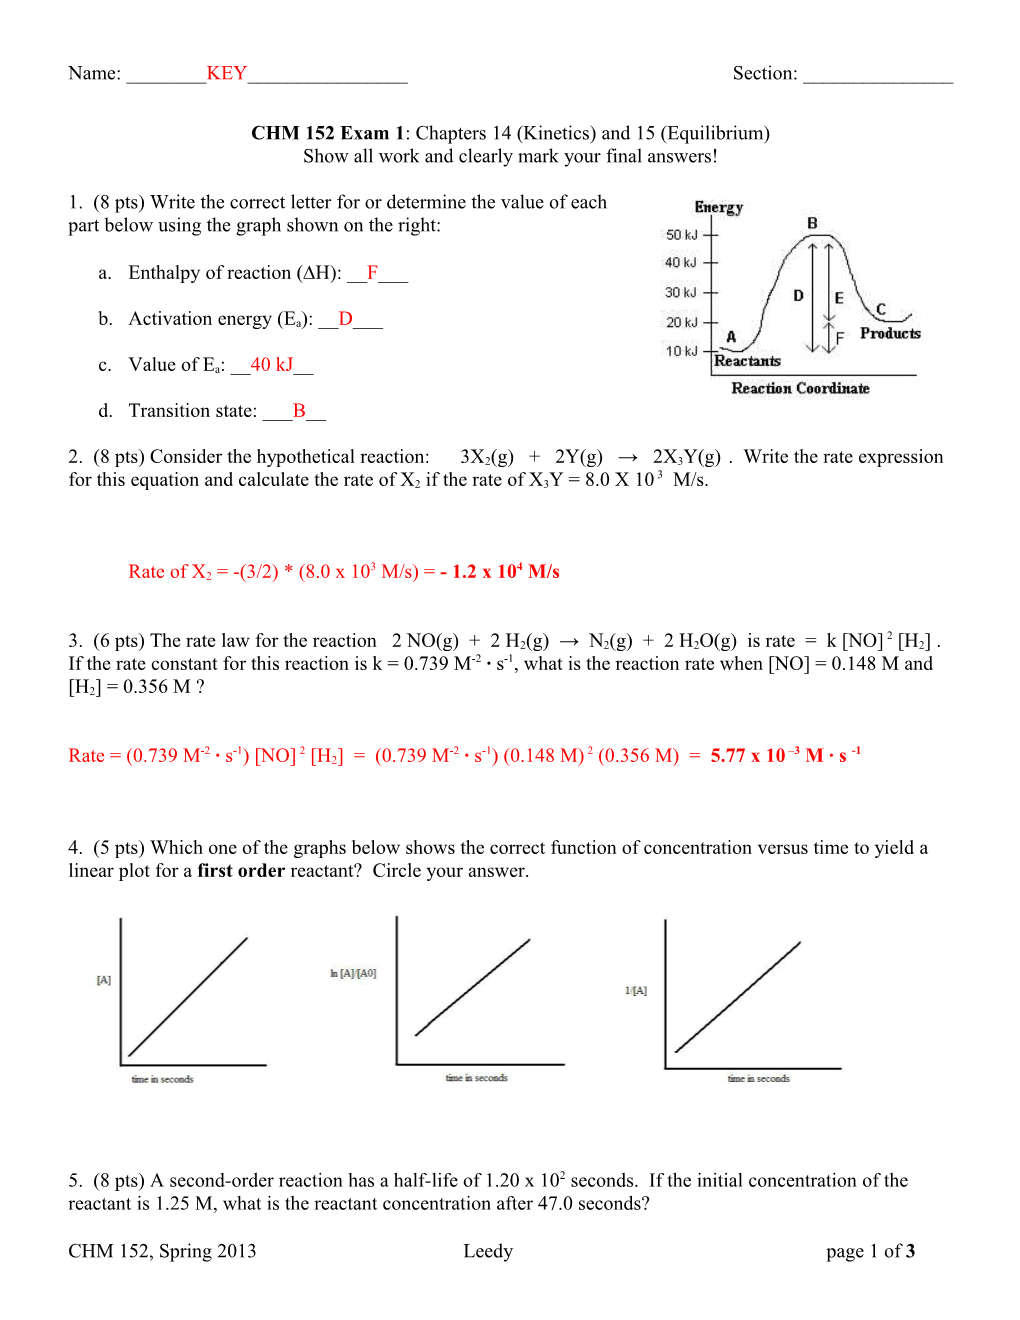 CHM 152 Exam 1: Chapters 14 (Kinetics) and 15 (Equilibrium)